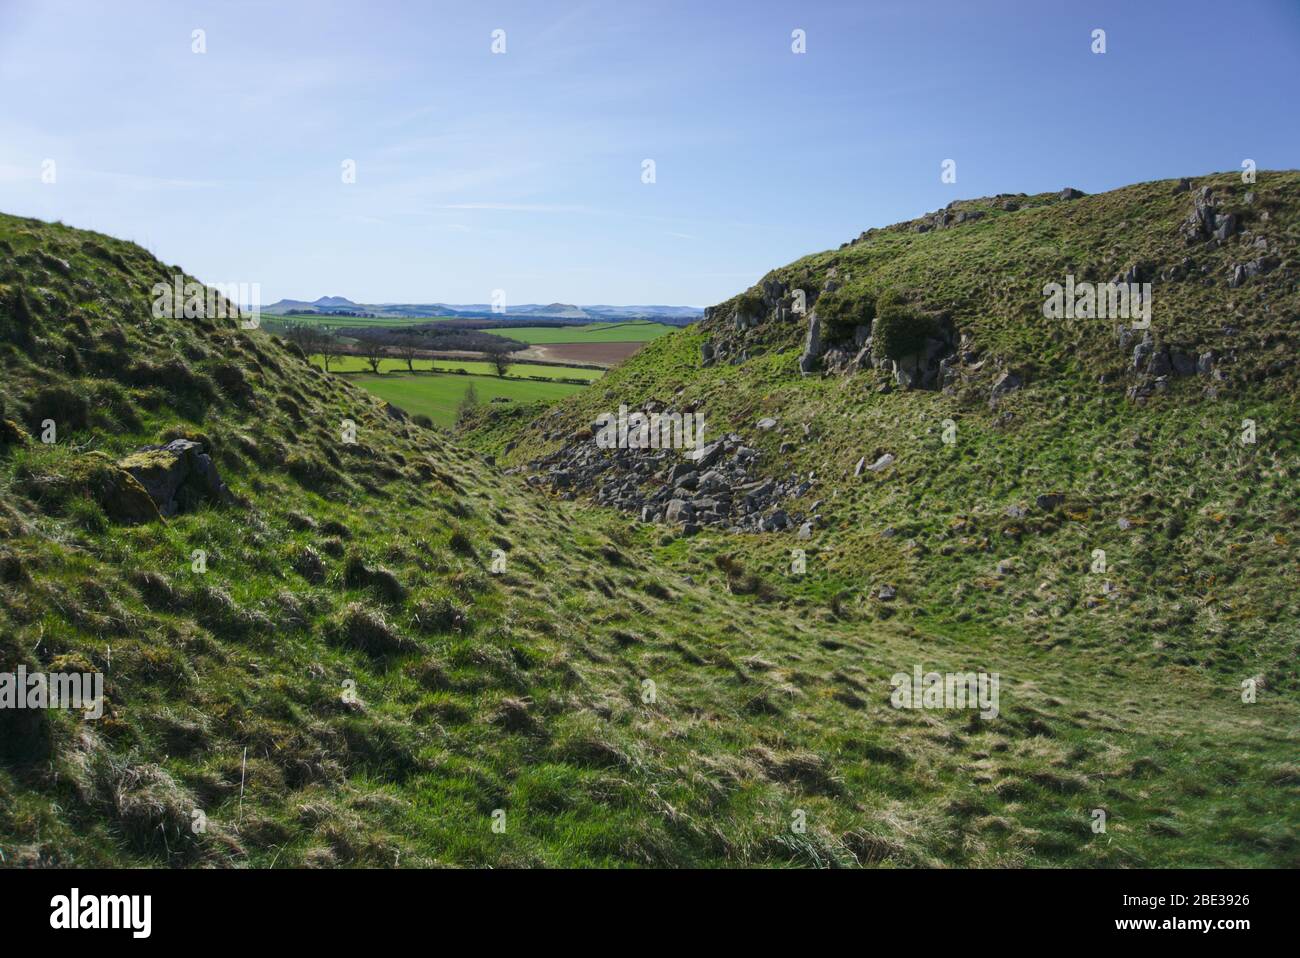 View through a cleft in two small hills towards farmland in Berwickshire, Scottish Borders, UK Stock Photo